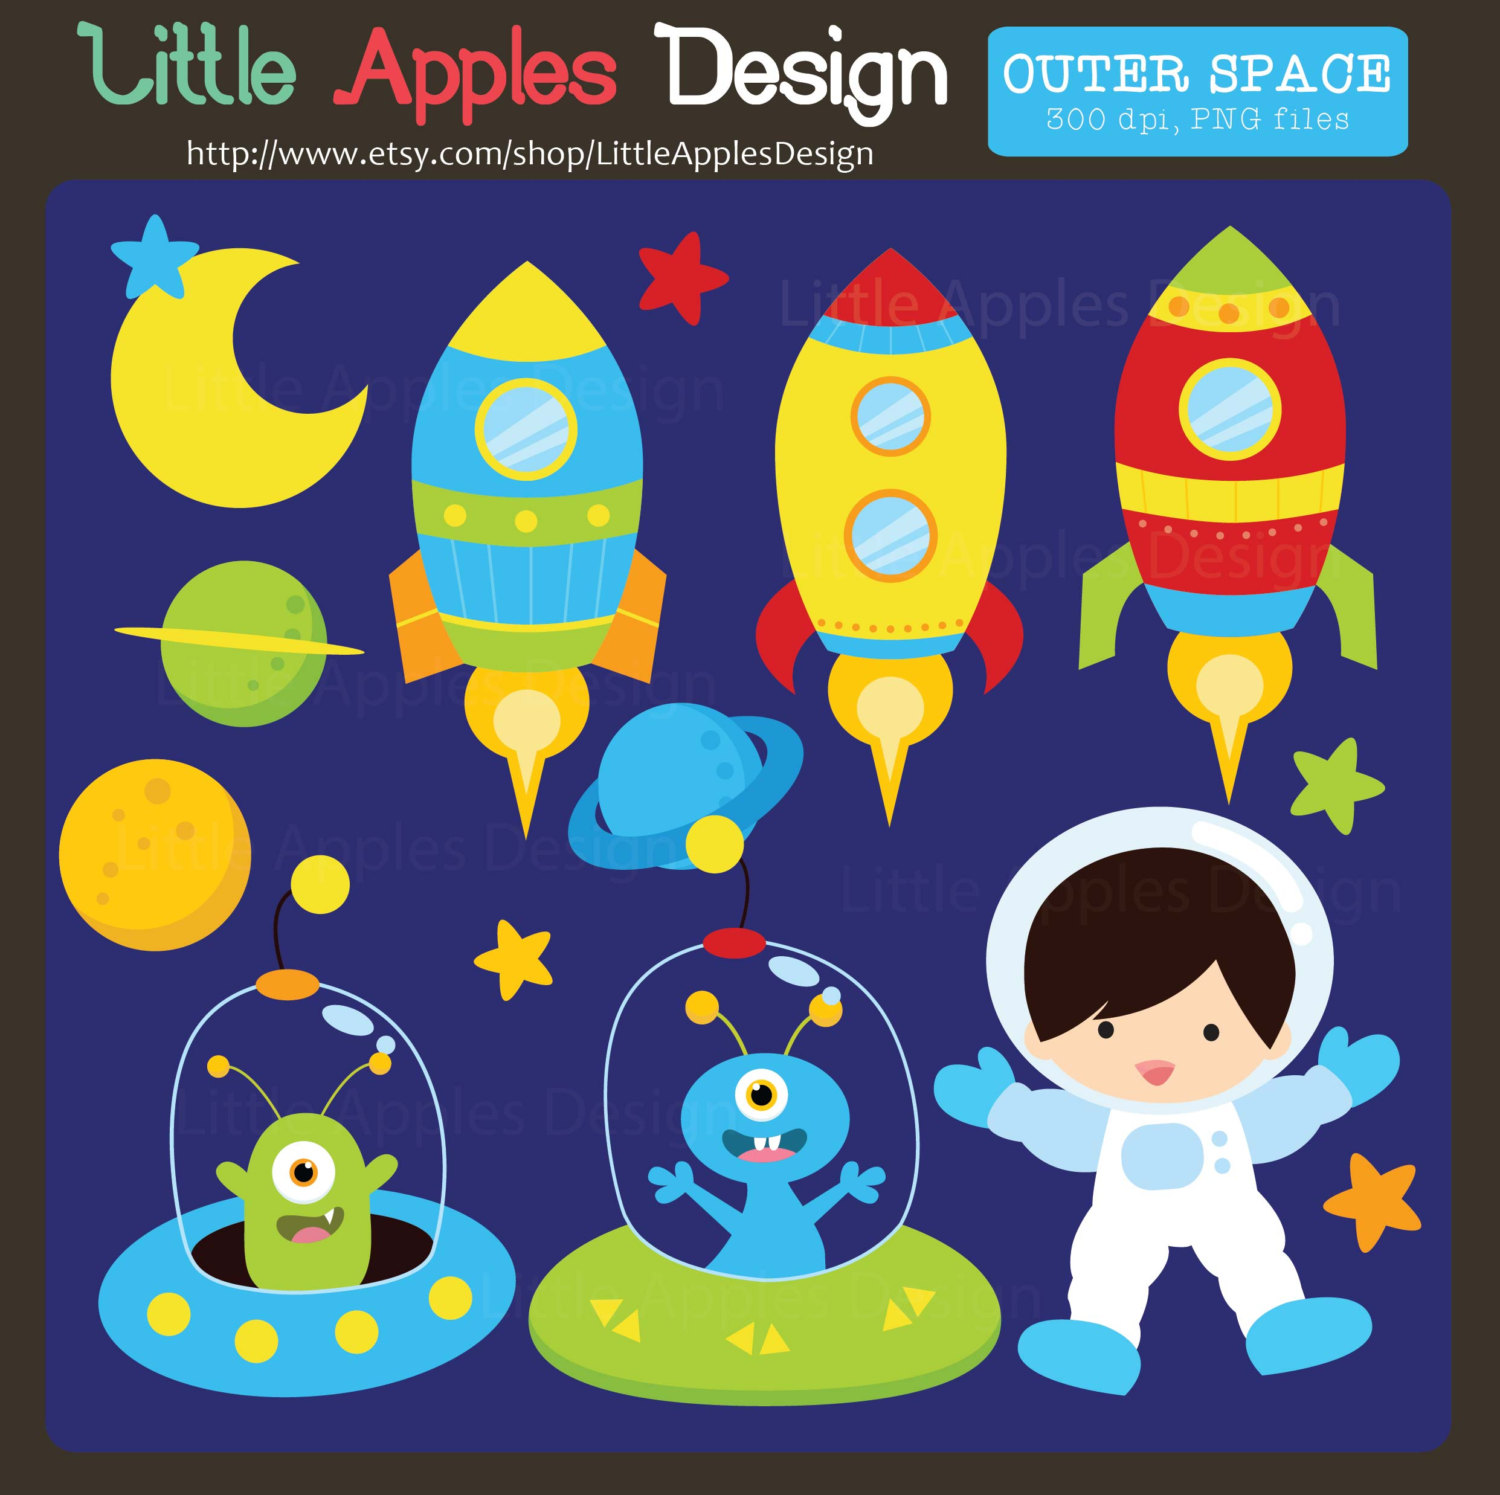 clipart kids outer space